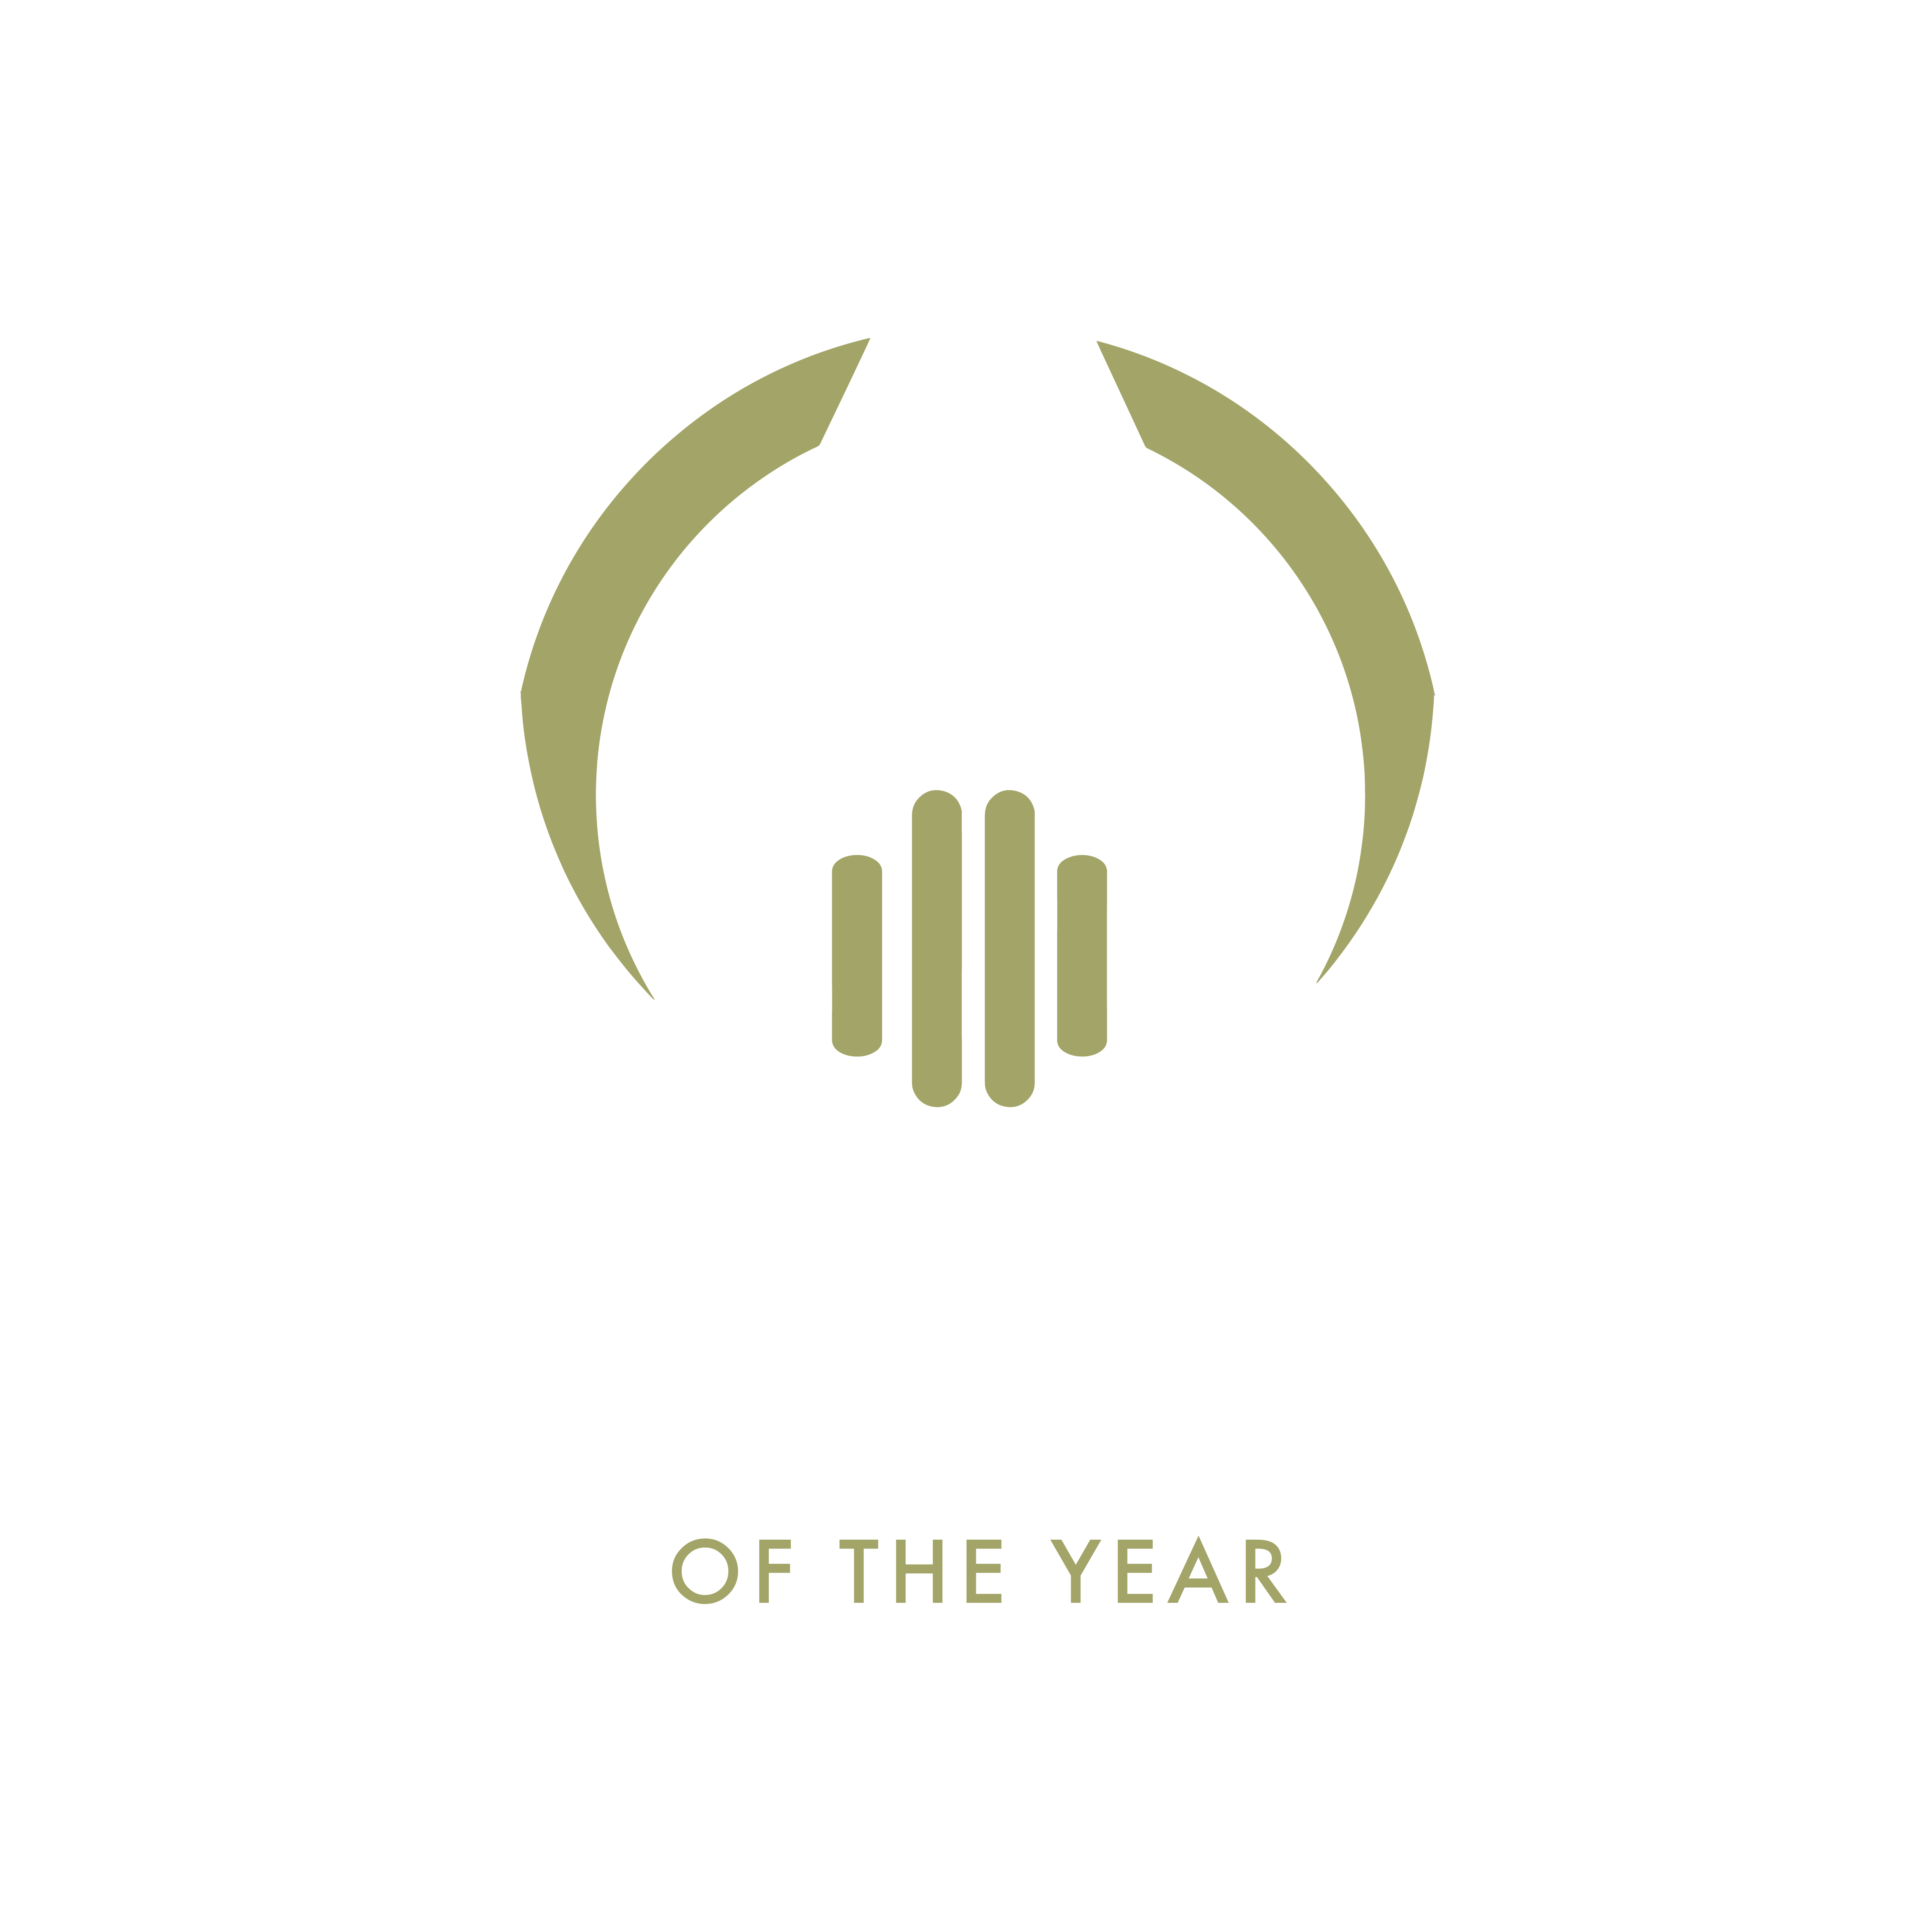 Franchise of the year